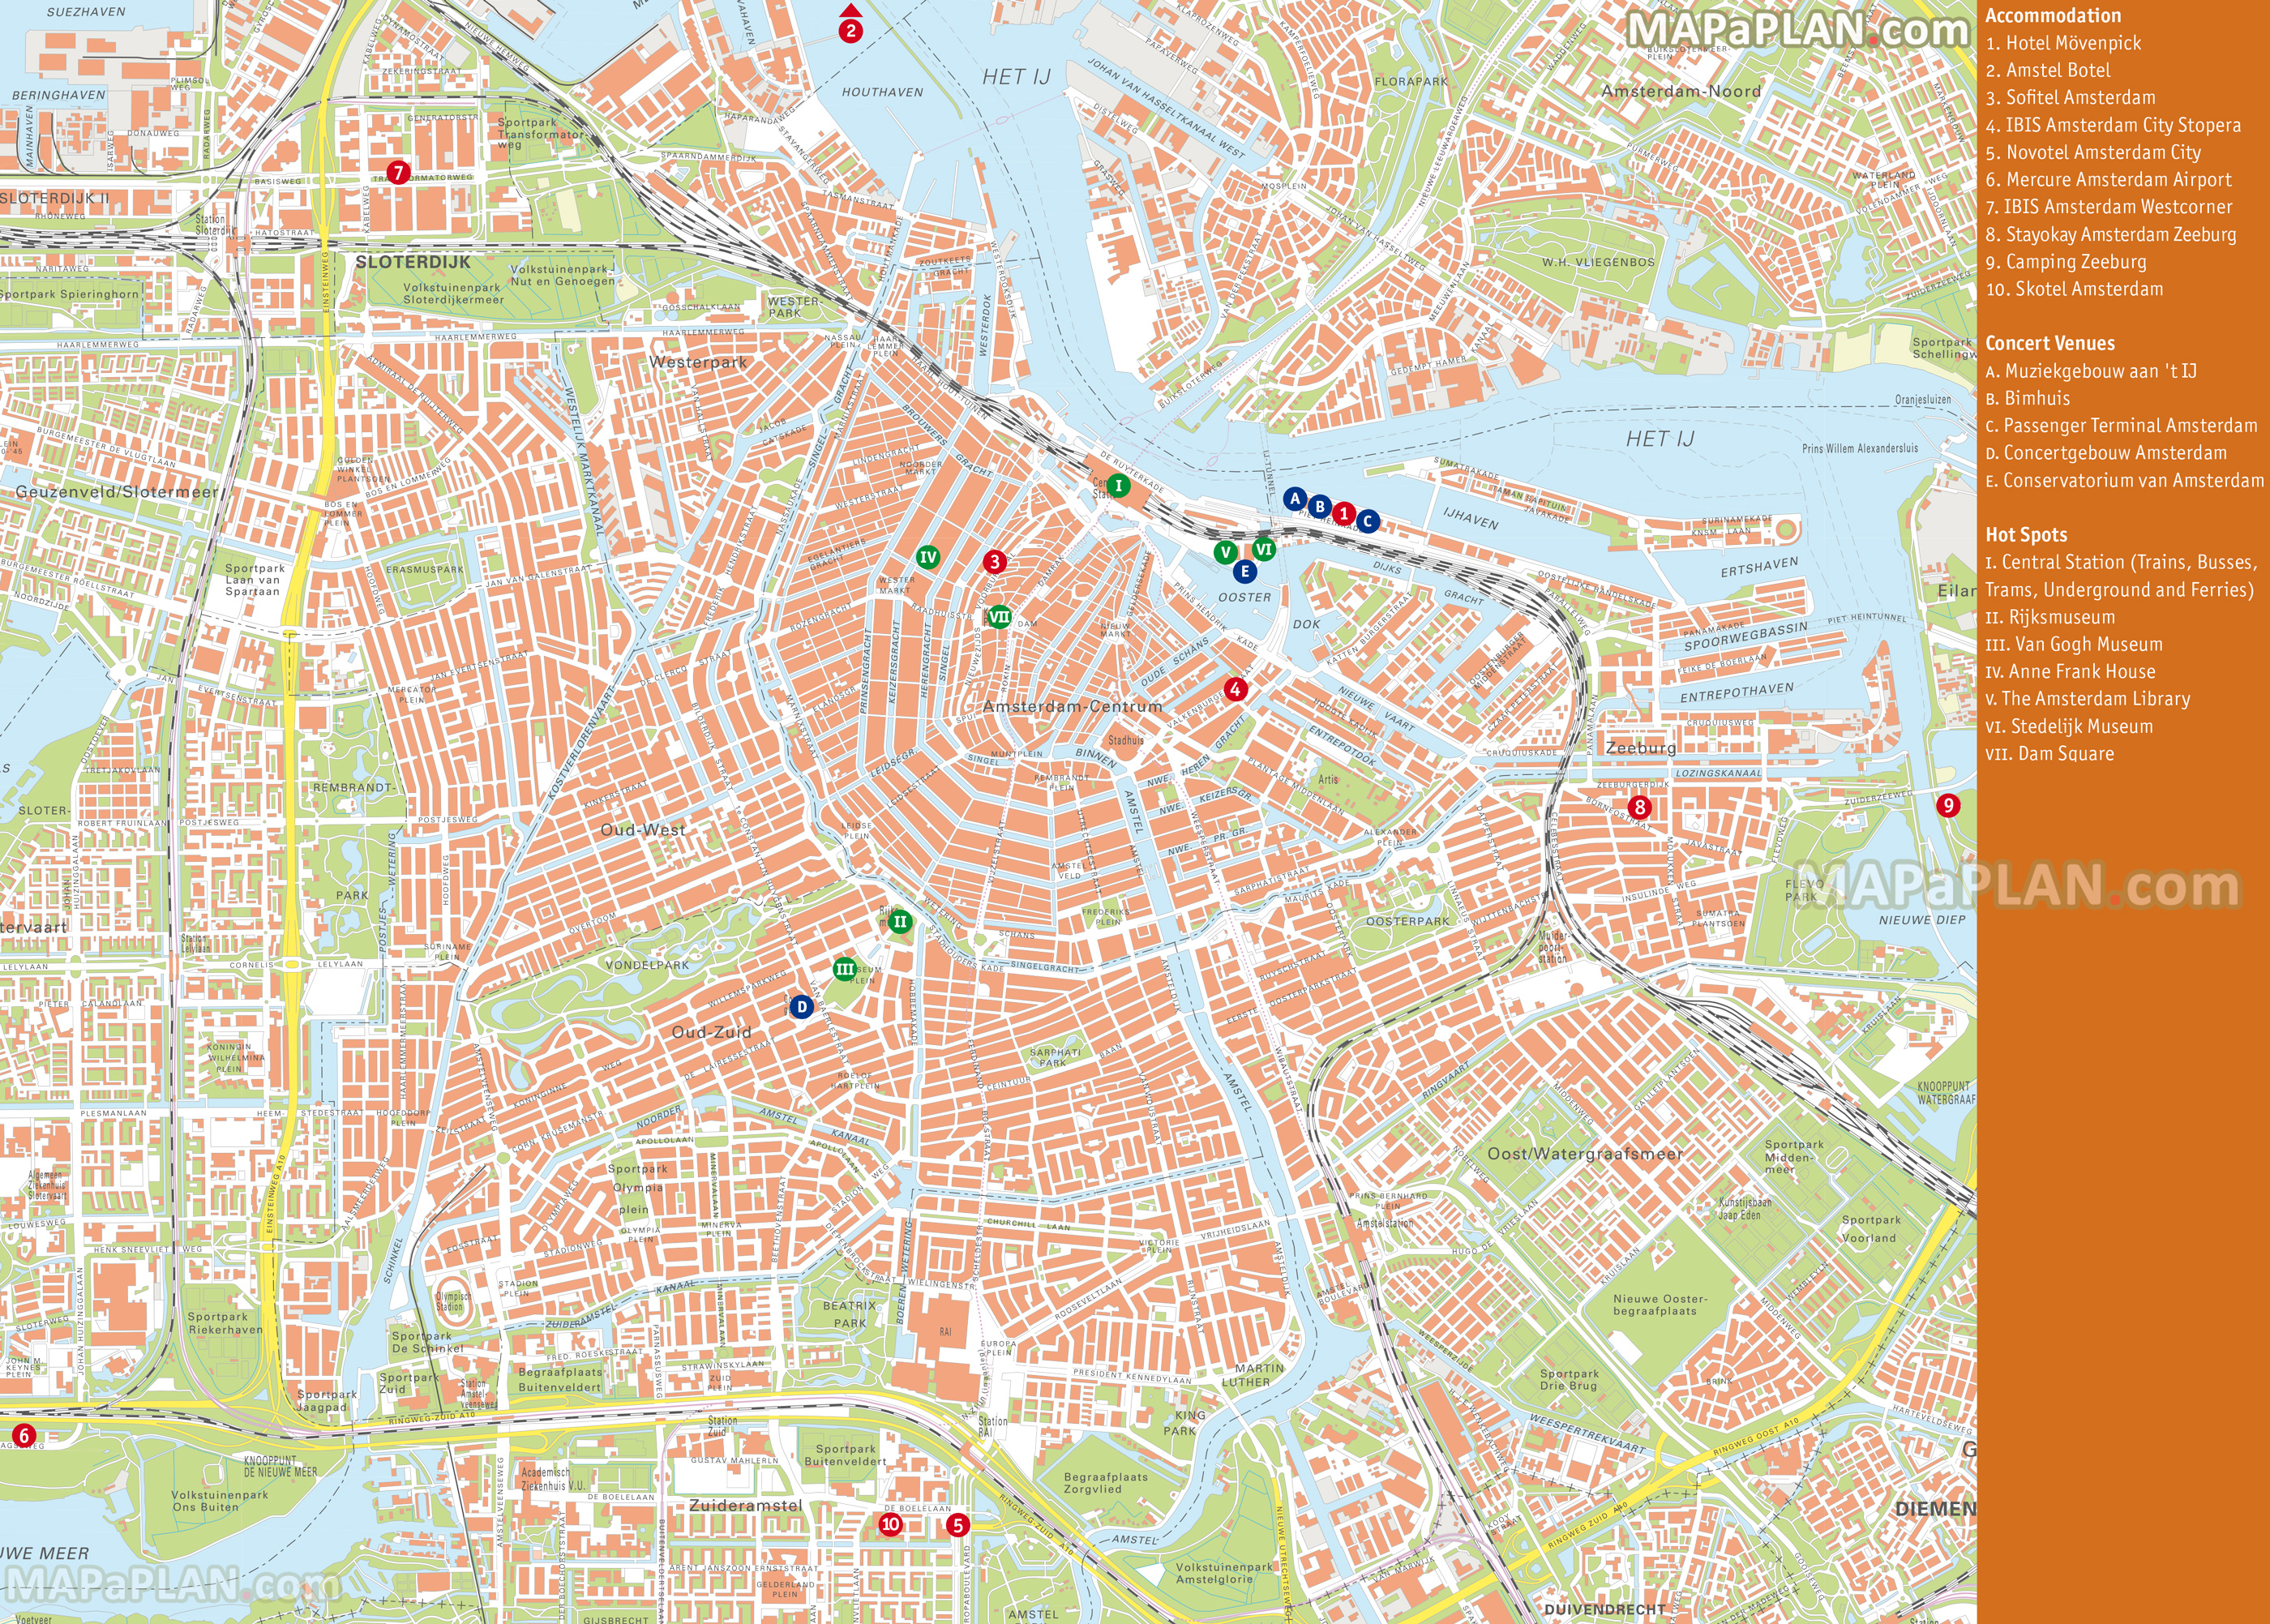 Accommodation main concert venues must do hot spots geographical map Amsterdam top tourist attractions map